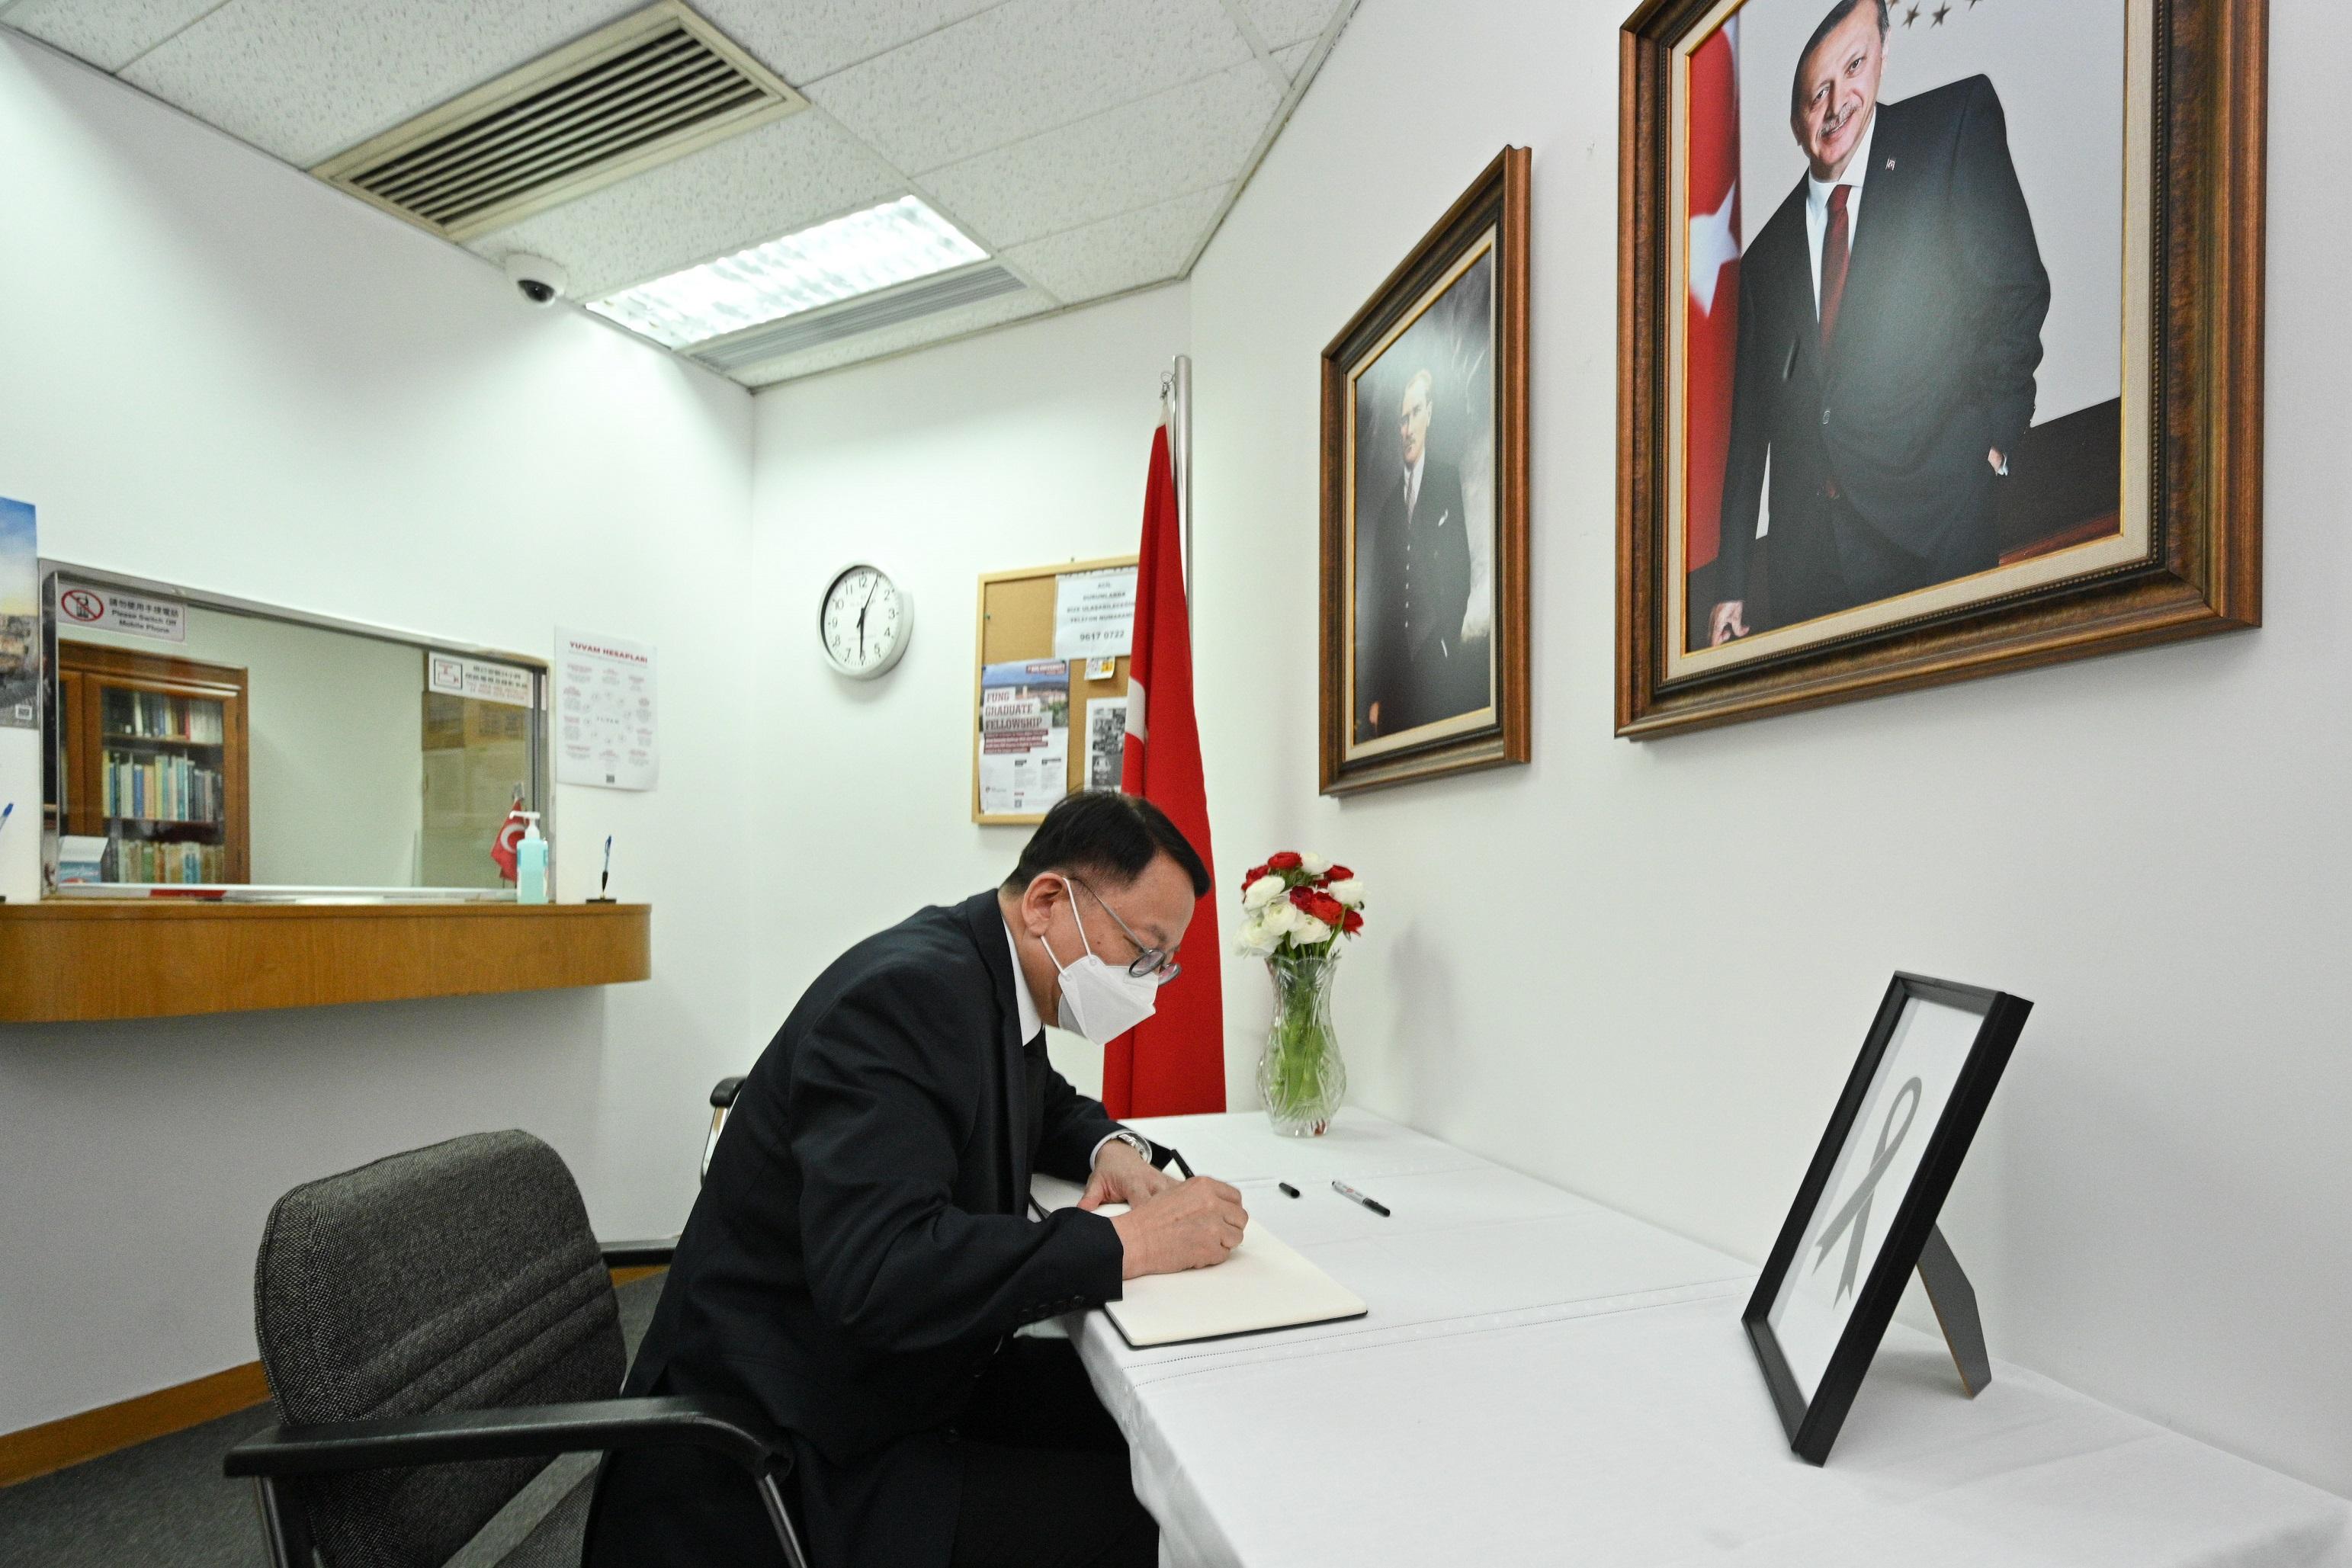 The Acting Chief Executive, Mr Chan Kwok-ki, visited the Turkish Consulate General in Hong Kong this afternoon (February 8). On behalf of the Government of the Hong Kong Special Administrative Region and the people of Hong Kong, he signed the condolence book to express the deepest condolences to the victims of the devastating earthquakes in Türkiye and Syria that occurred early this week and extend sincere sympathies to the bereaved families and the affected. 